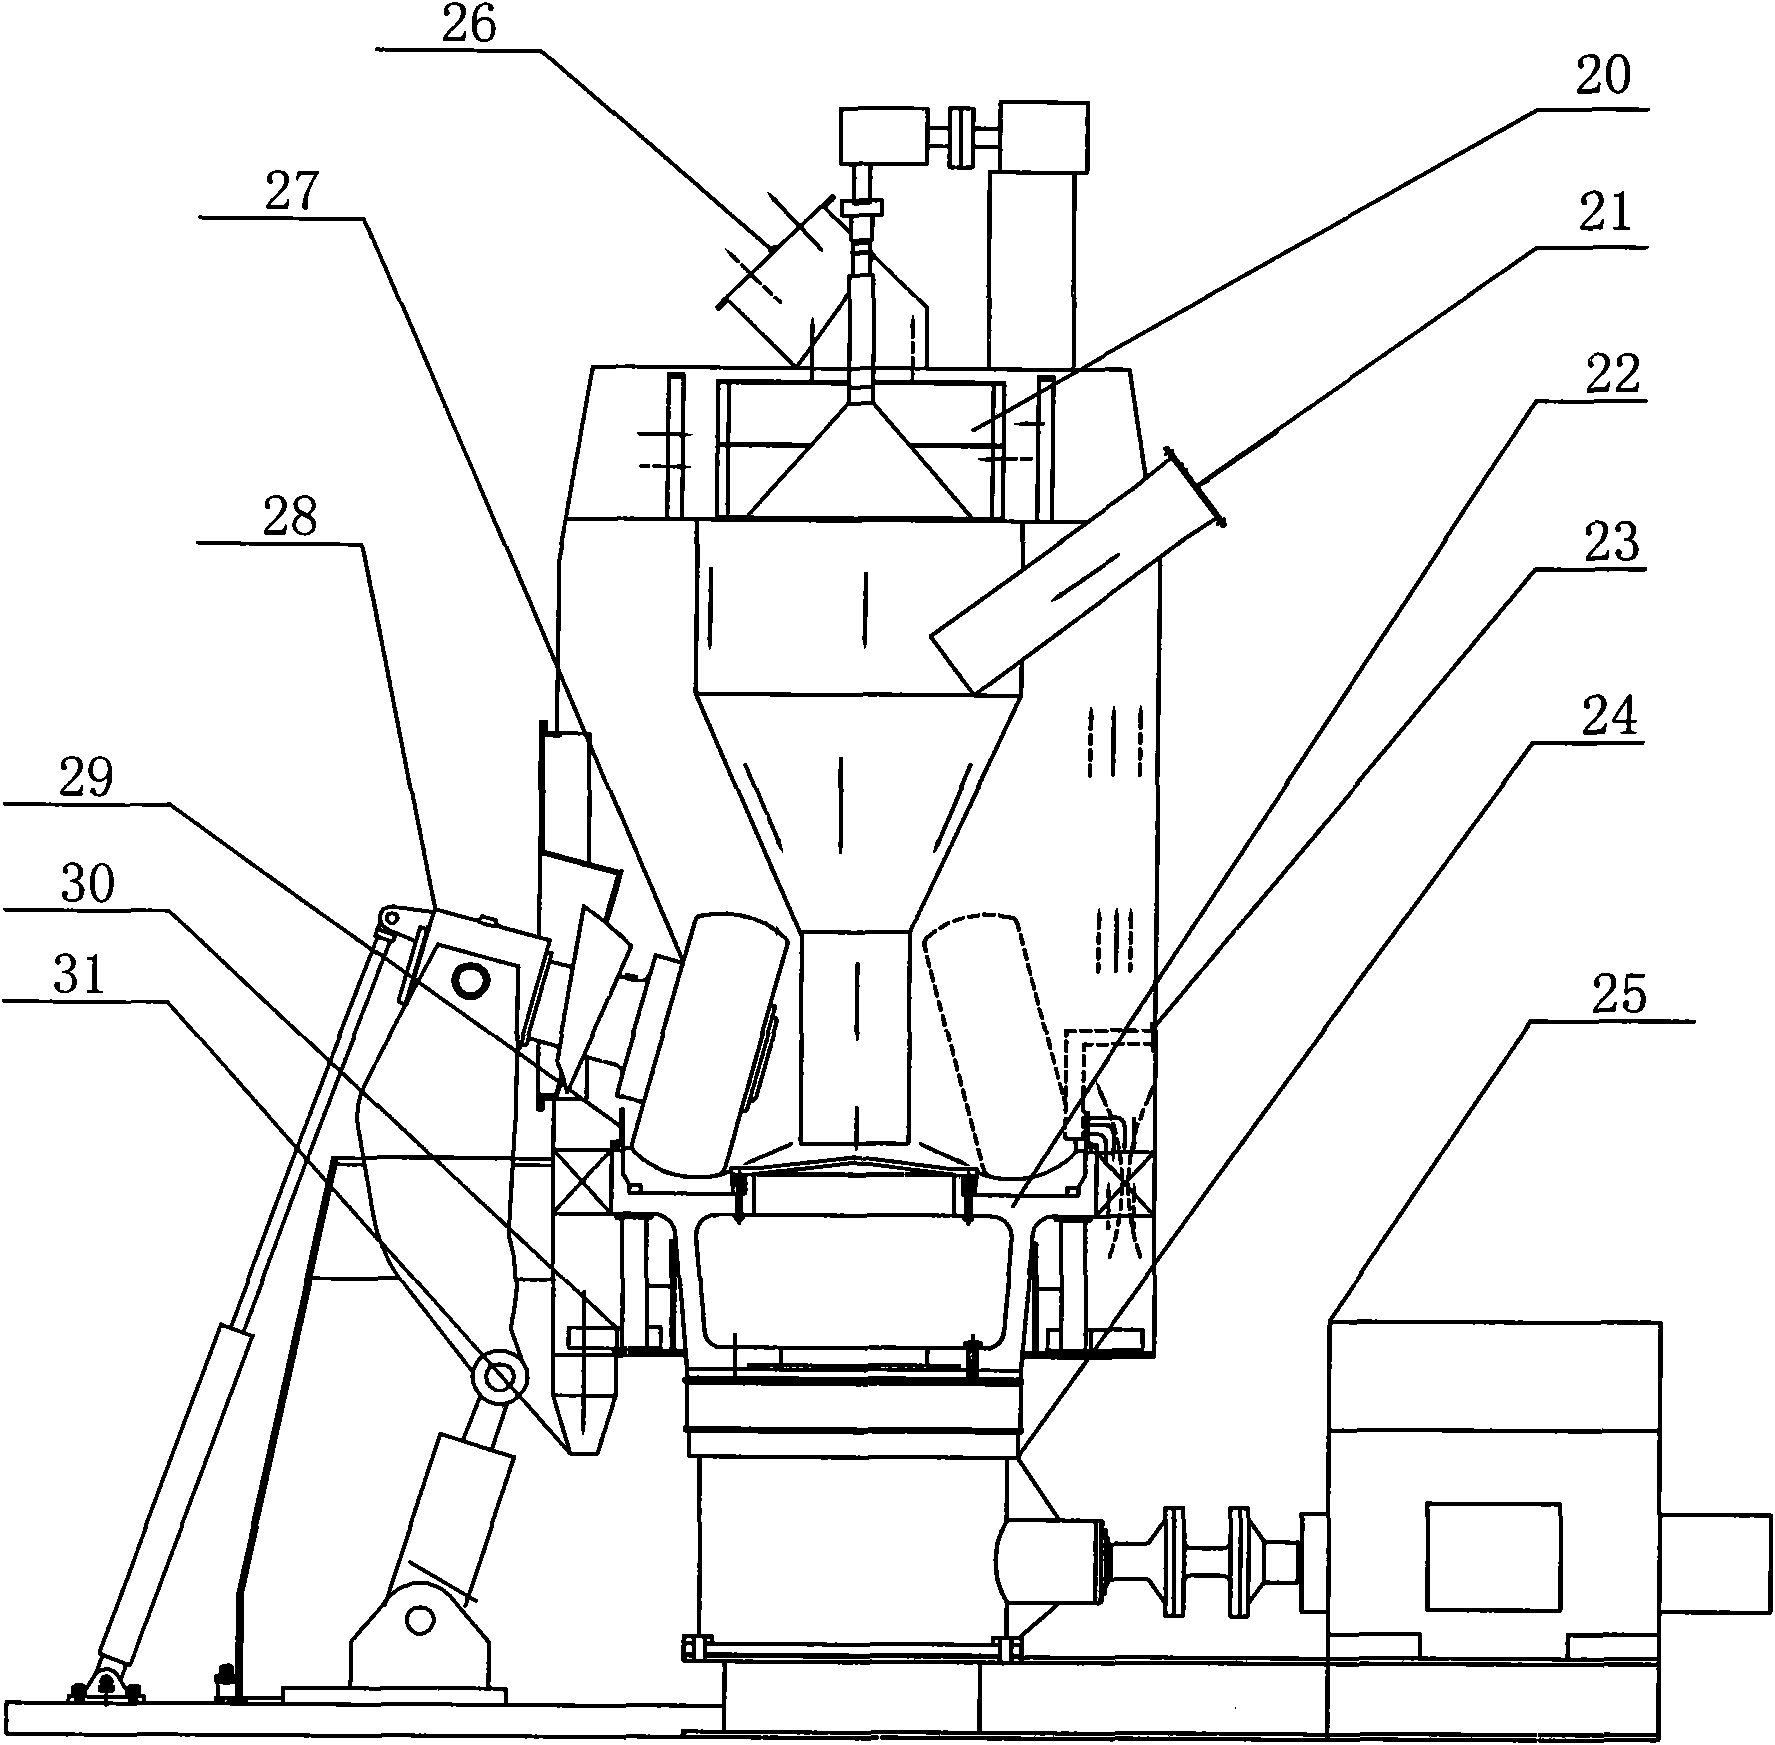 Semi-finished pre-grinding vertical-milling and ball-milling combined grinding device